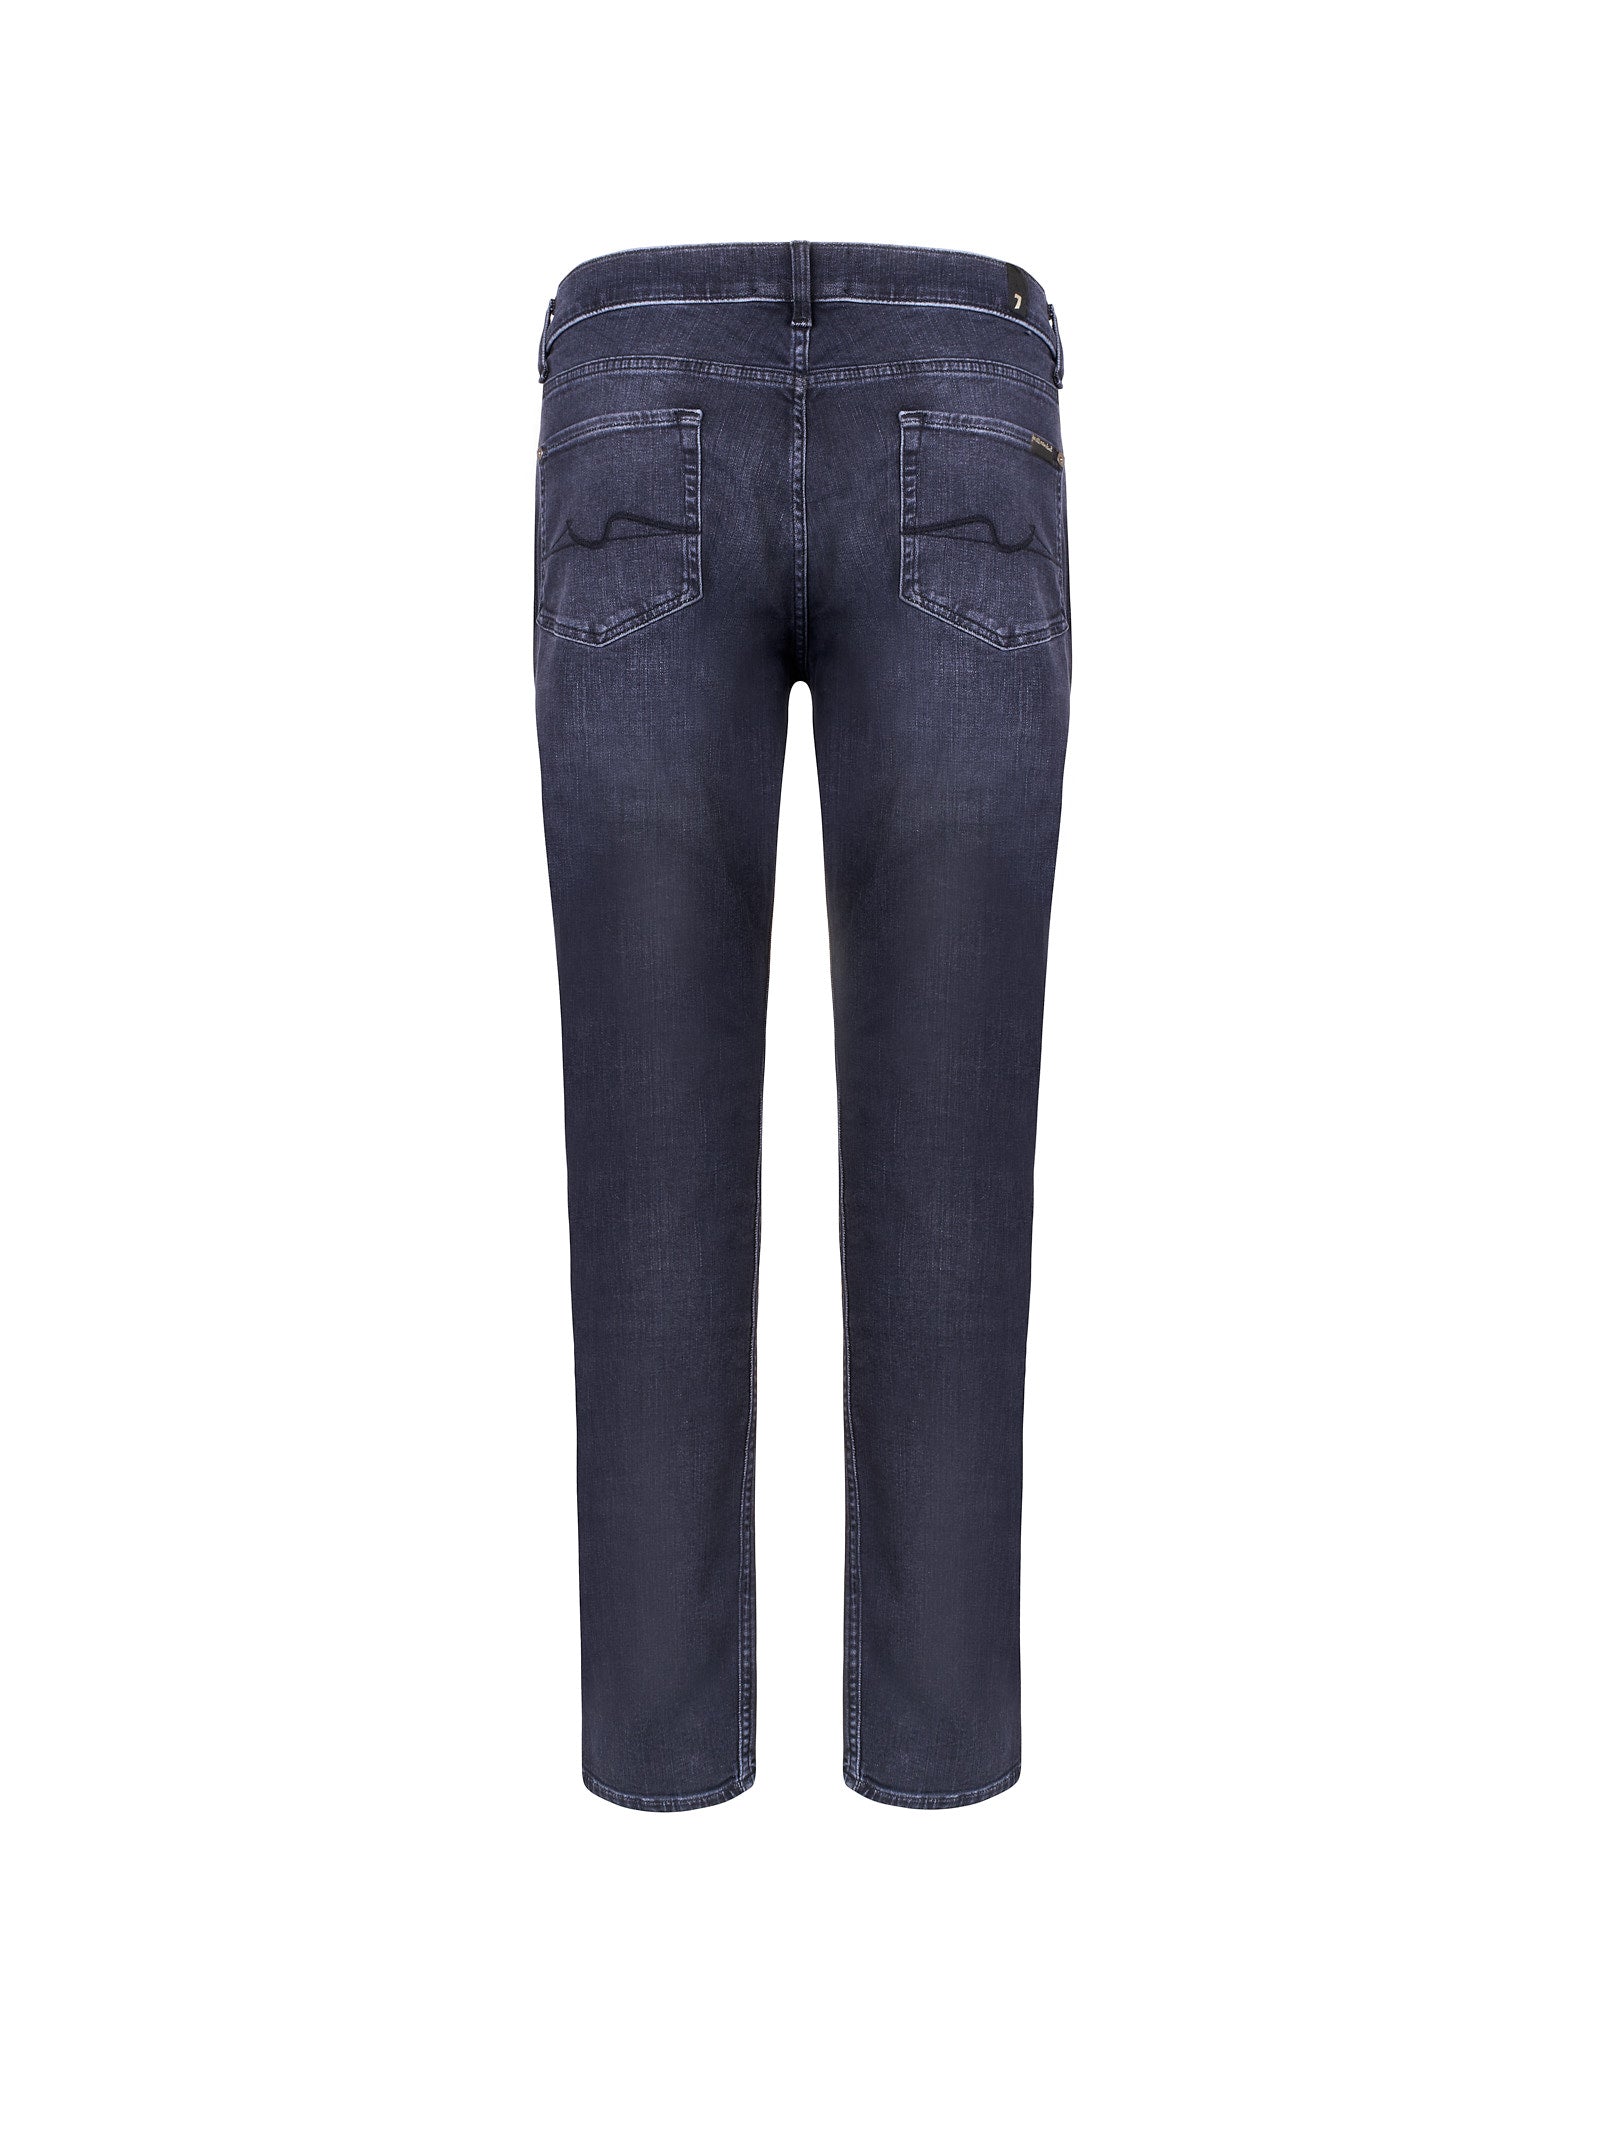 Jeans 7 FOR ALL MANKIND
Nero